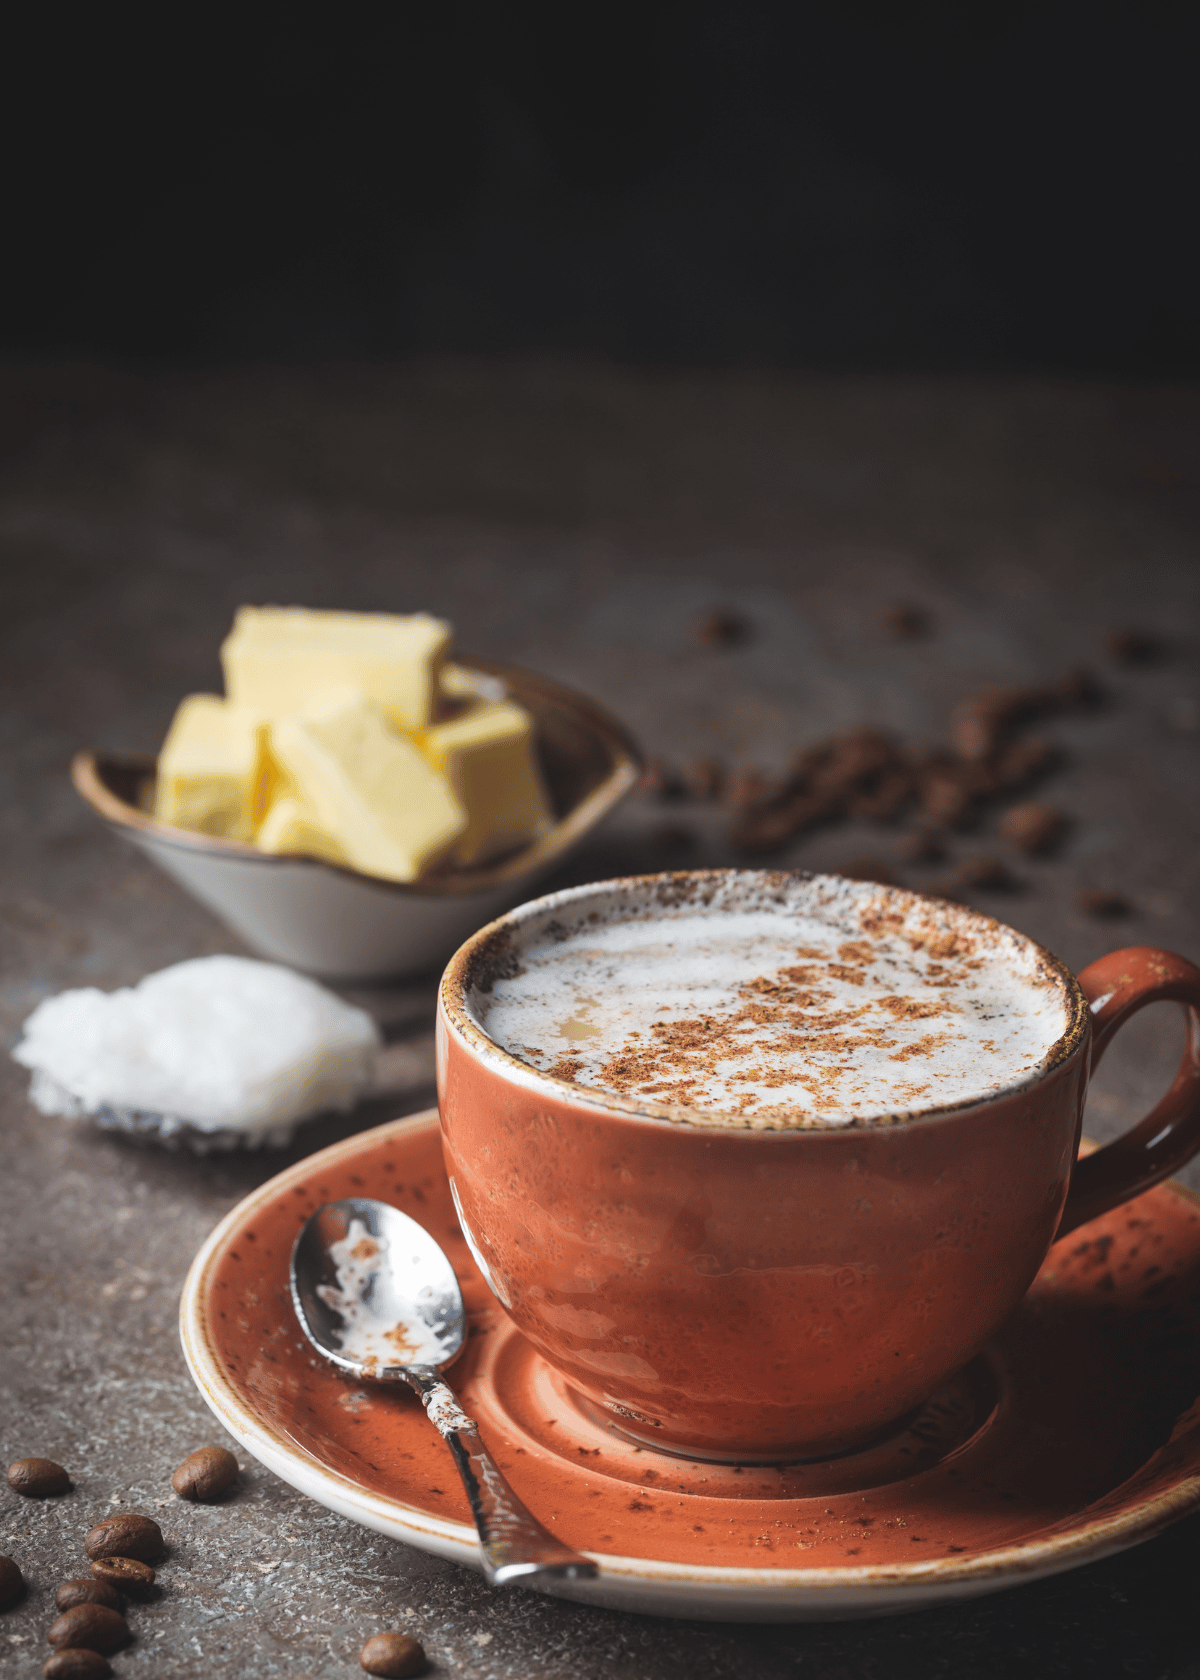 can you drink keto coffee while fasting